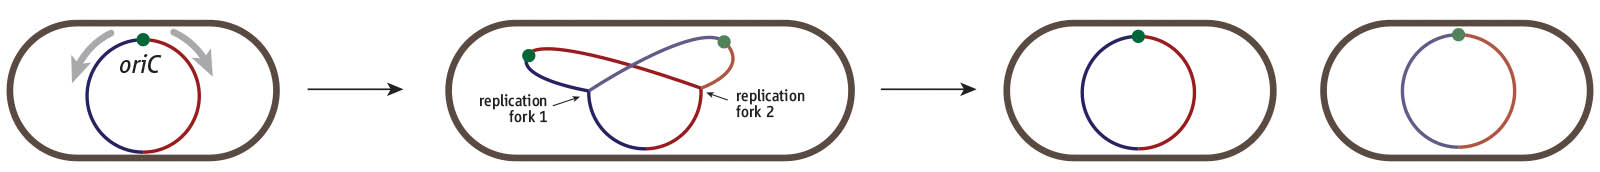 Cell division cycle of a bacterium such as *E. coli*. Cells harbour a single circular chromosome which contains a single replication origin called *oriC*. Two replication forks are recruited and duplicate the chromosome in opposite directions, thereby dividing the chromosome into a clockwise (red) and counterclockwise (blue) half or replichore. Once replication is complete the two chromosomes can be segregated into the two daughter cells.